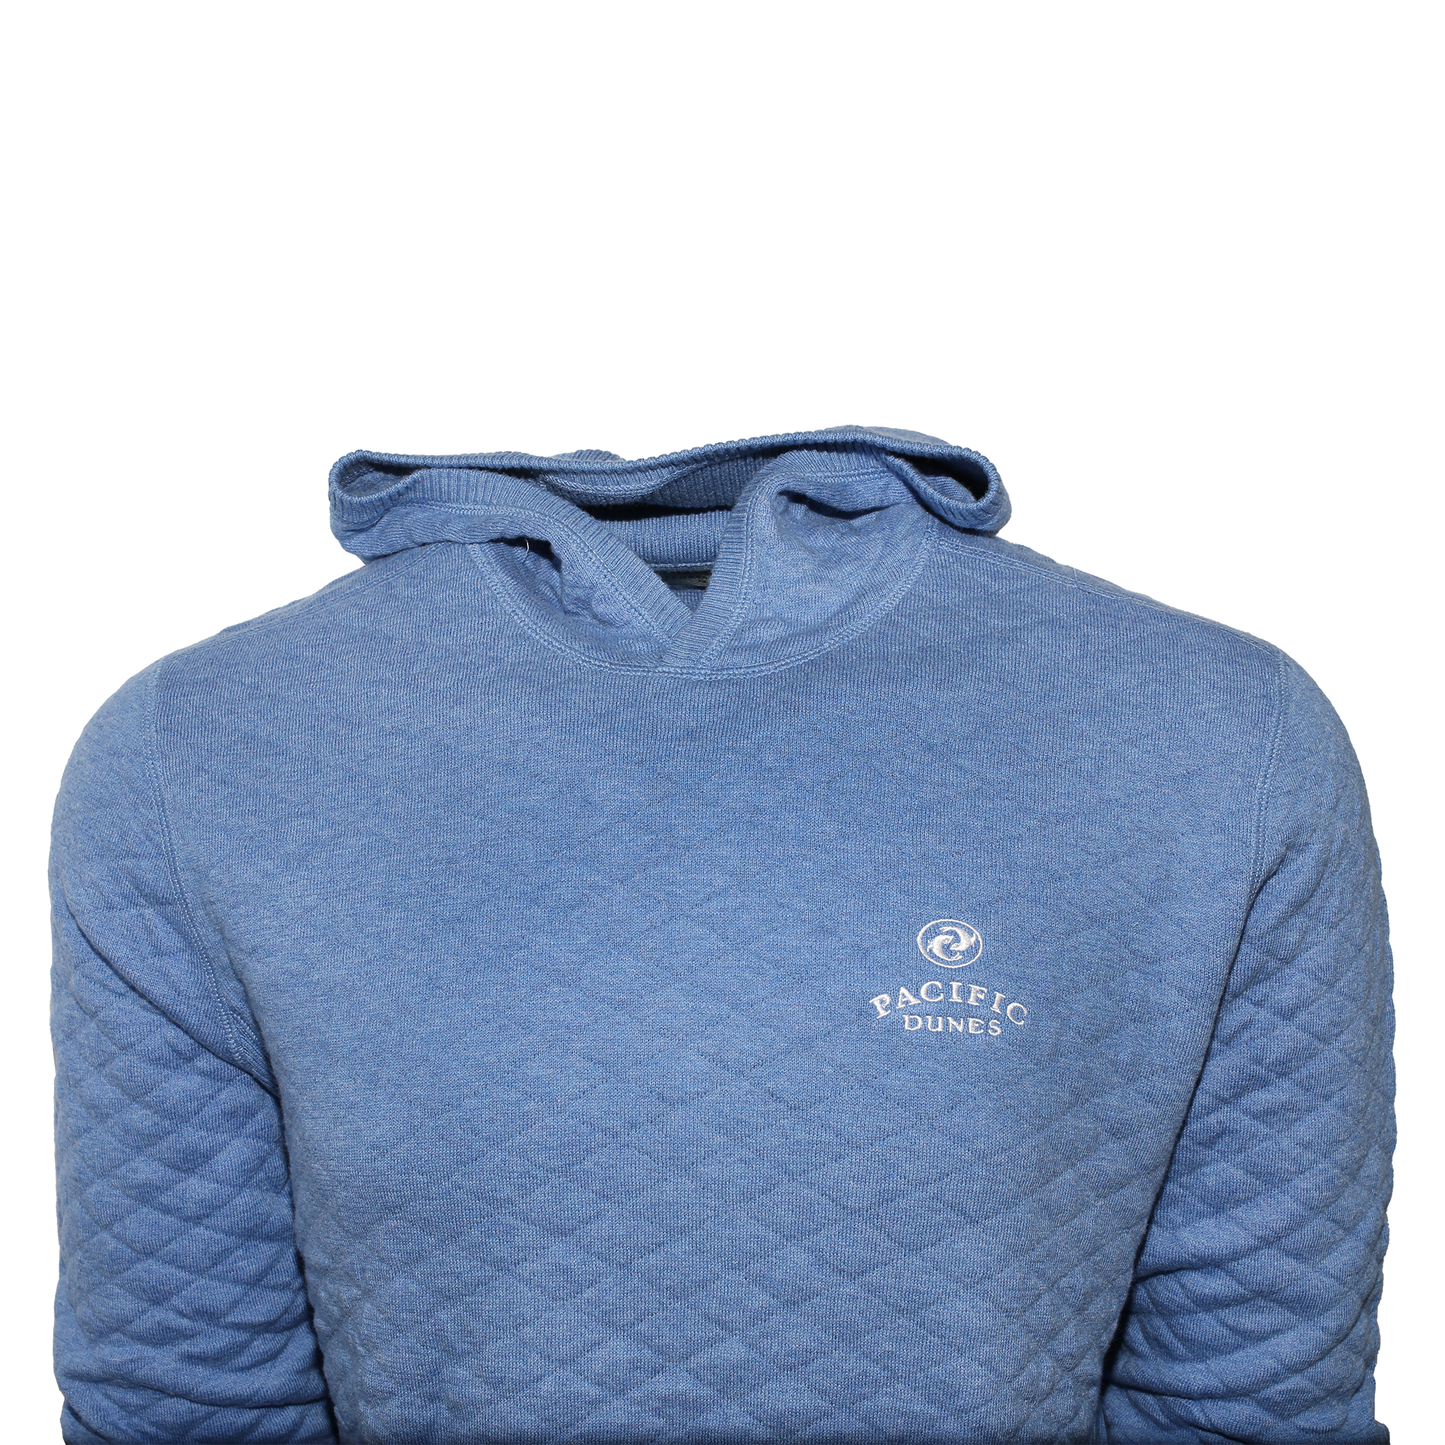 Wallace Sweater Hoodie - Pacific Dunes